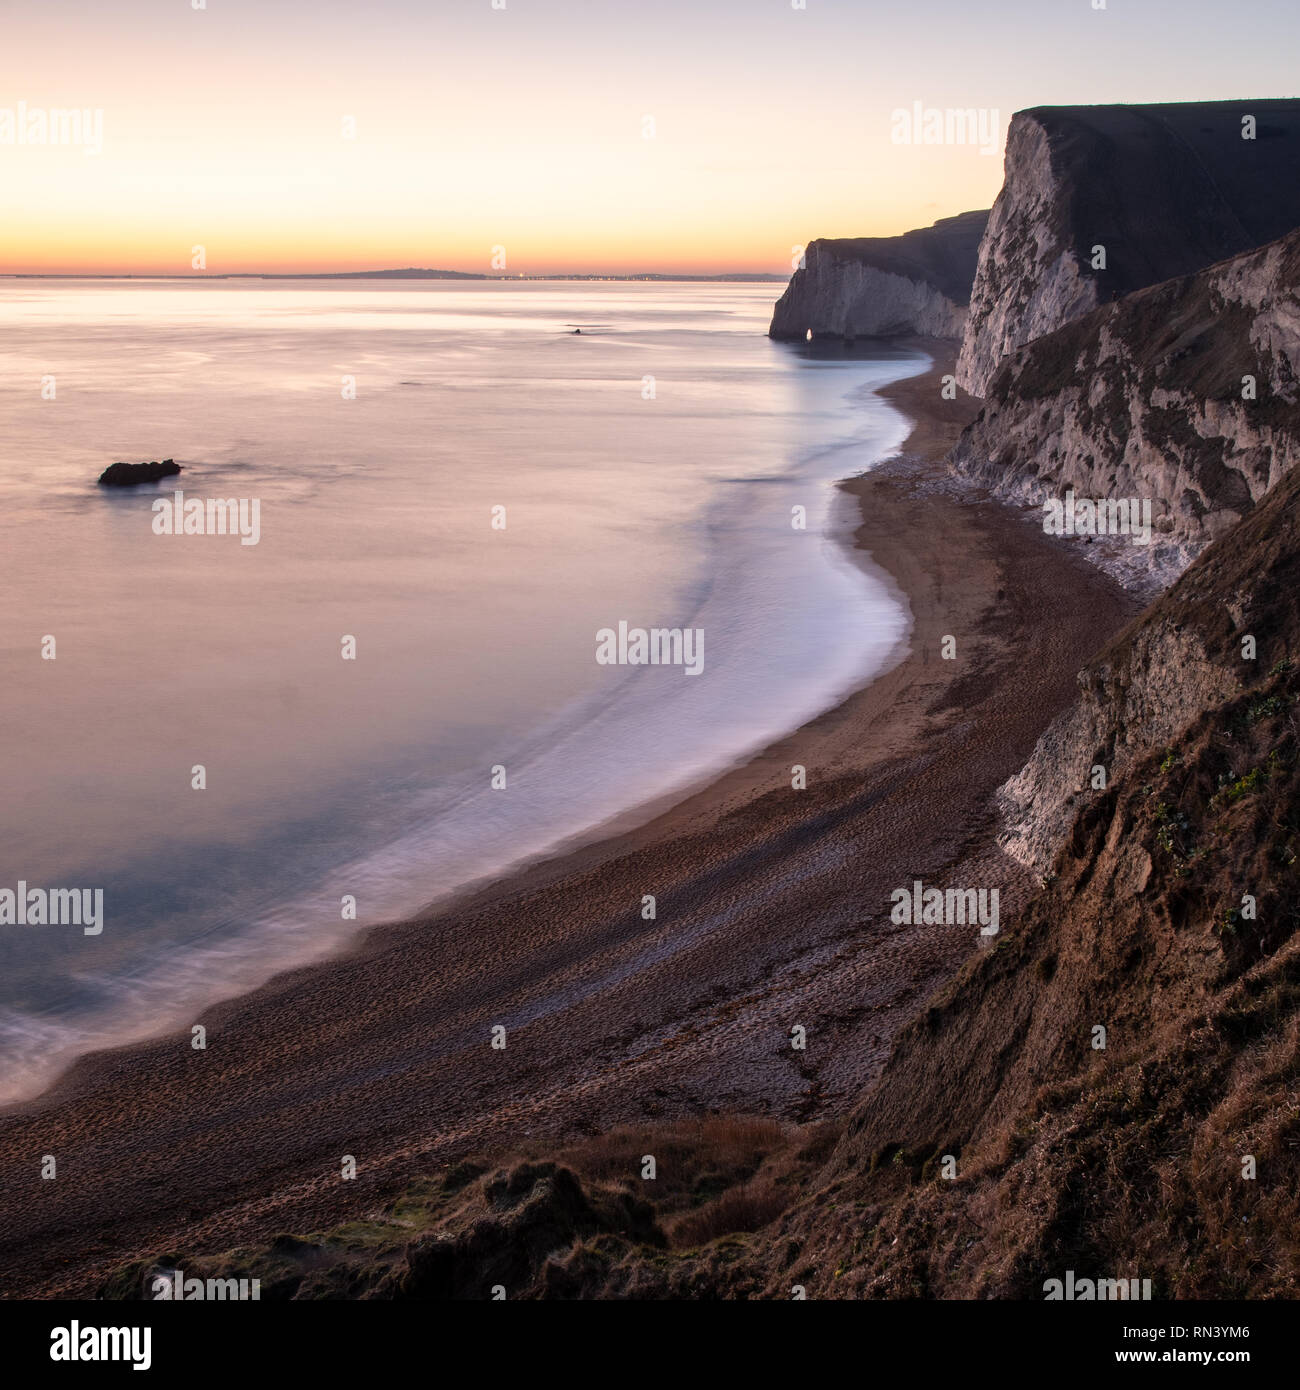 The afterglow of sunset lights up the sky behind Bat's Head and Weymouth Bay on Dorset's Jurassic Coast. Stock Photo